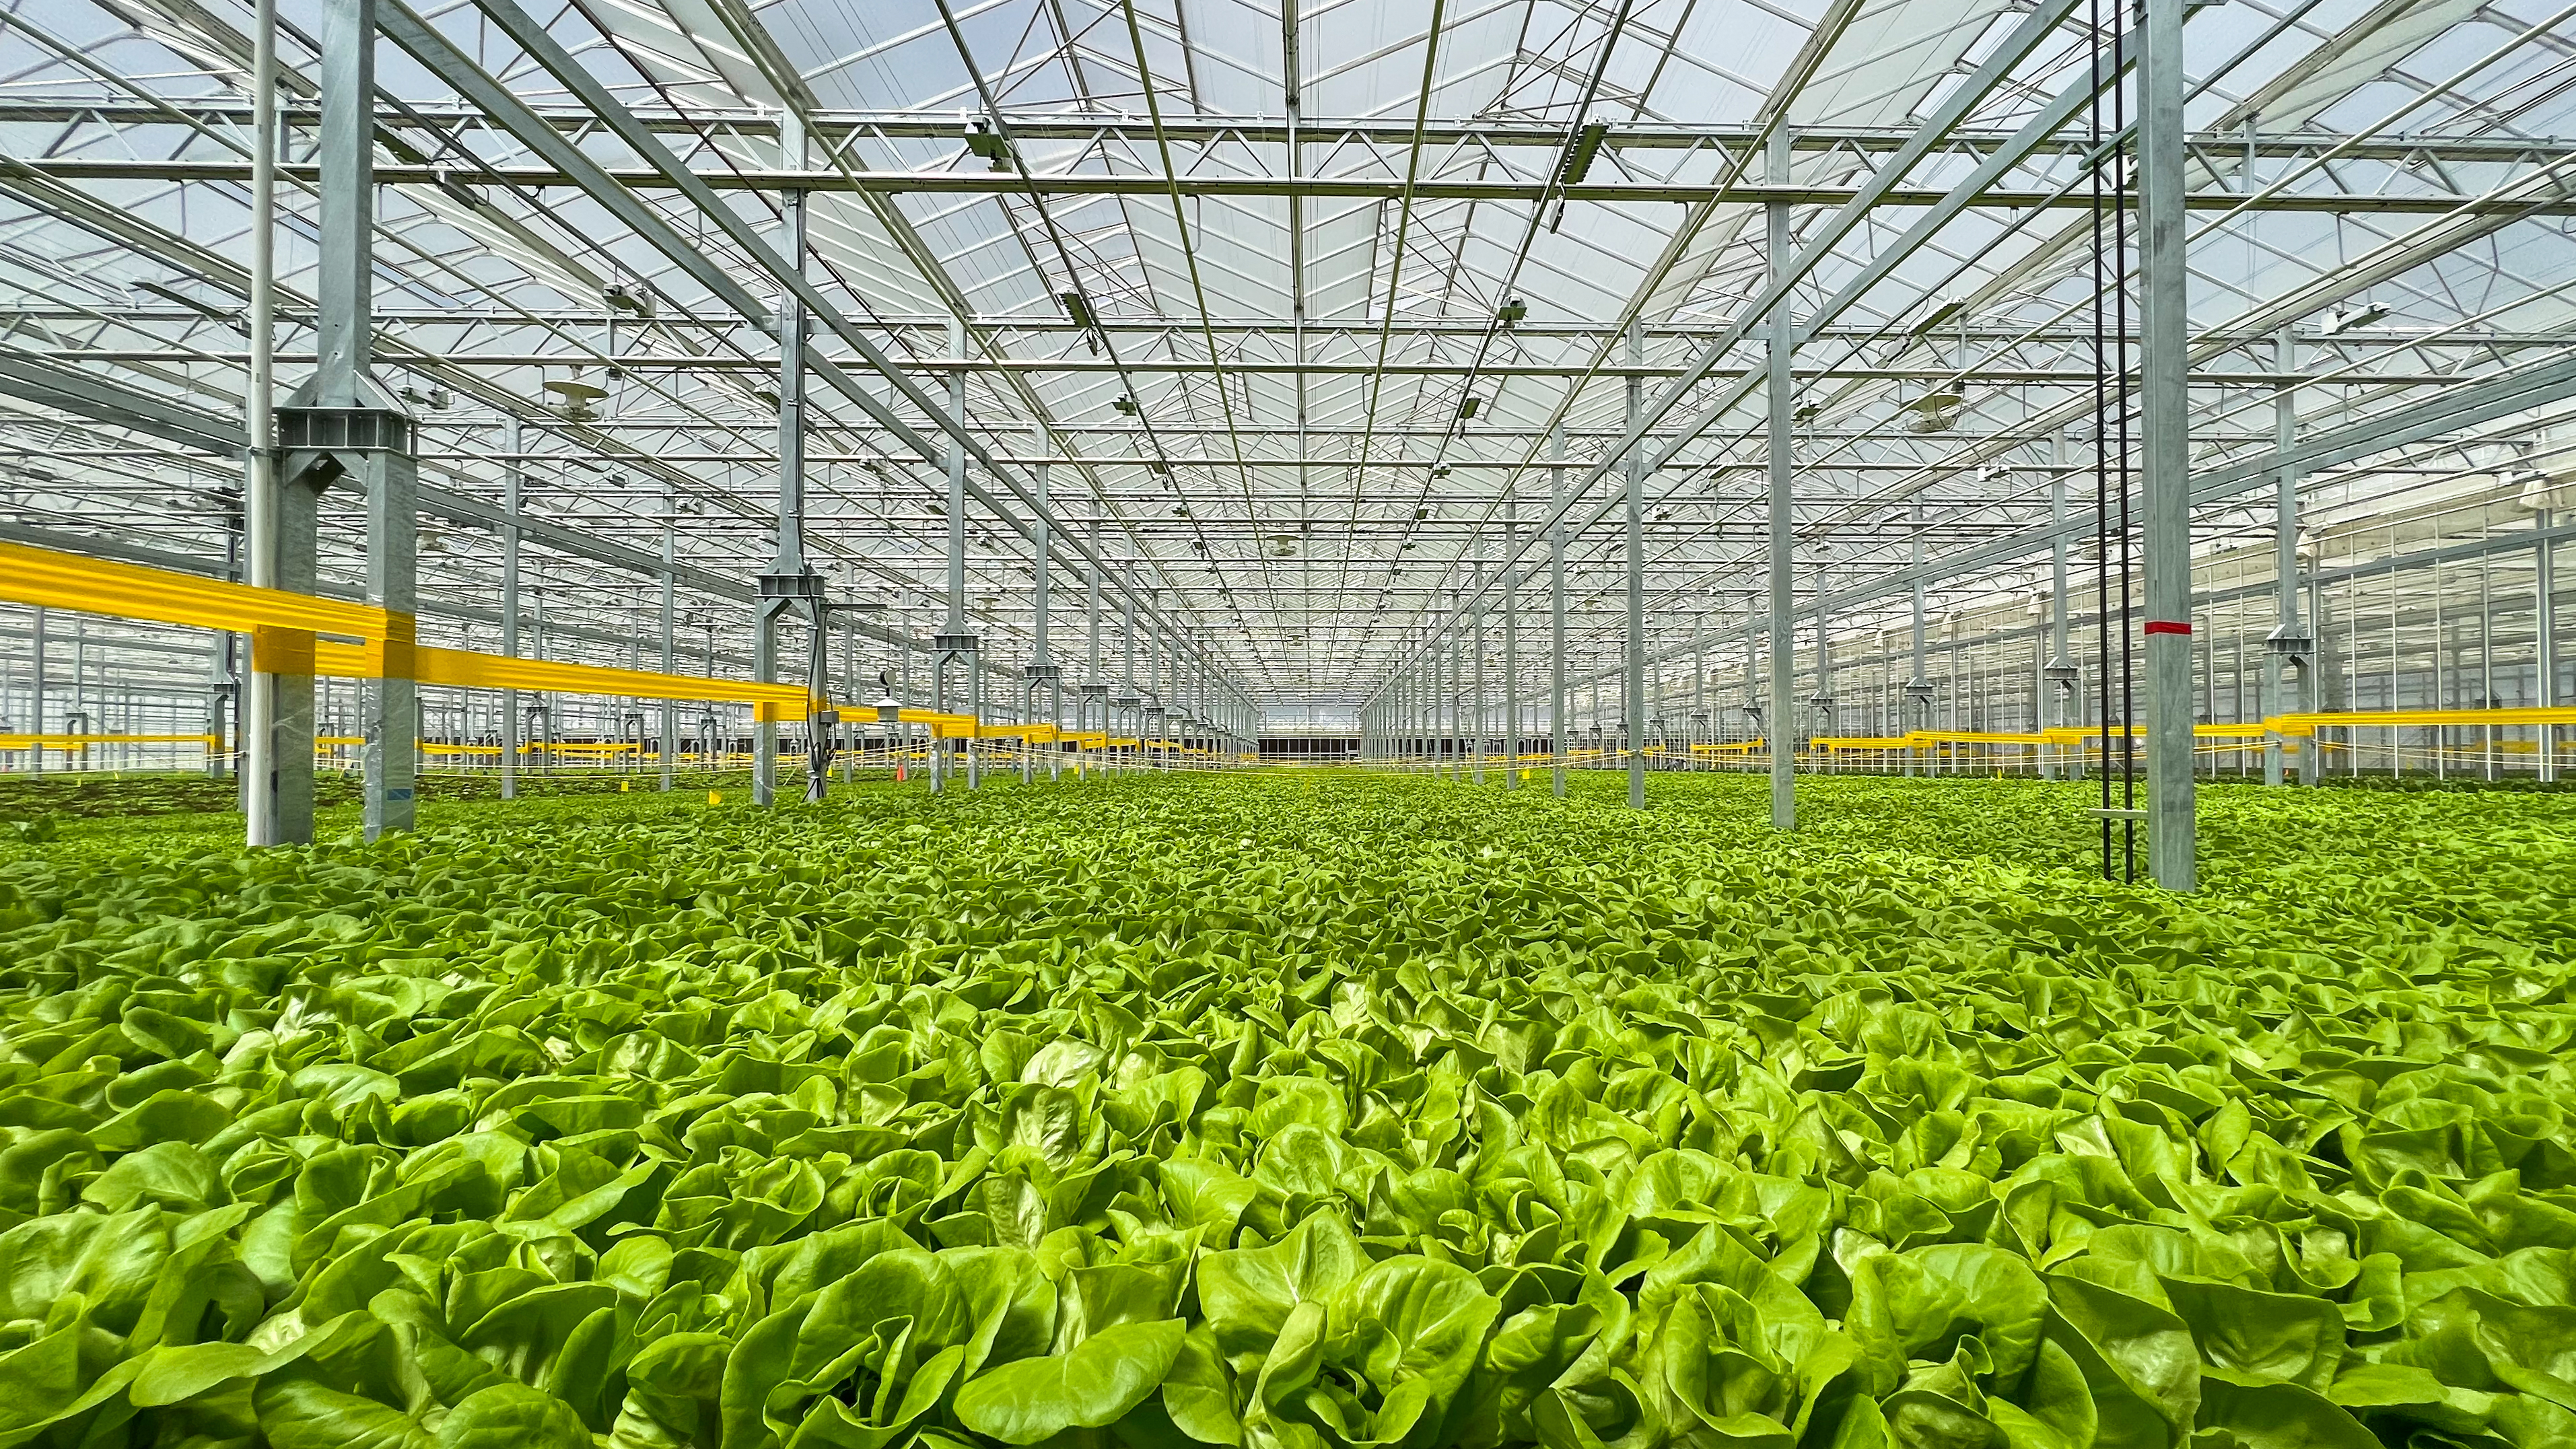 Gotham Greens opens new high-tech greenhouse in Providence, Rhode